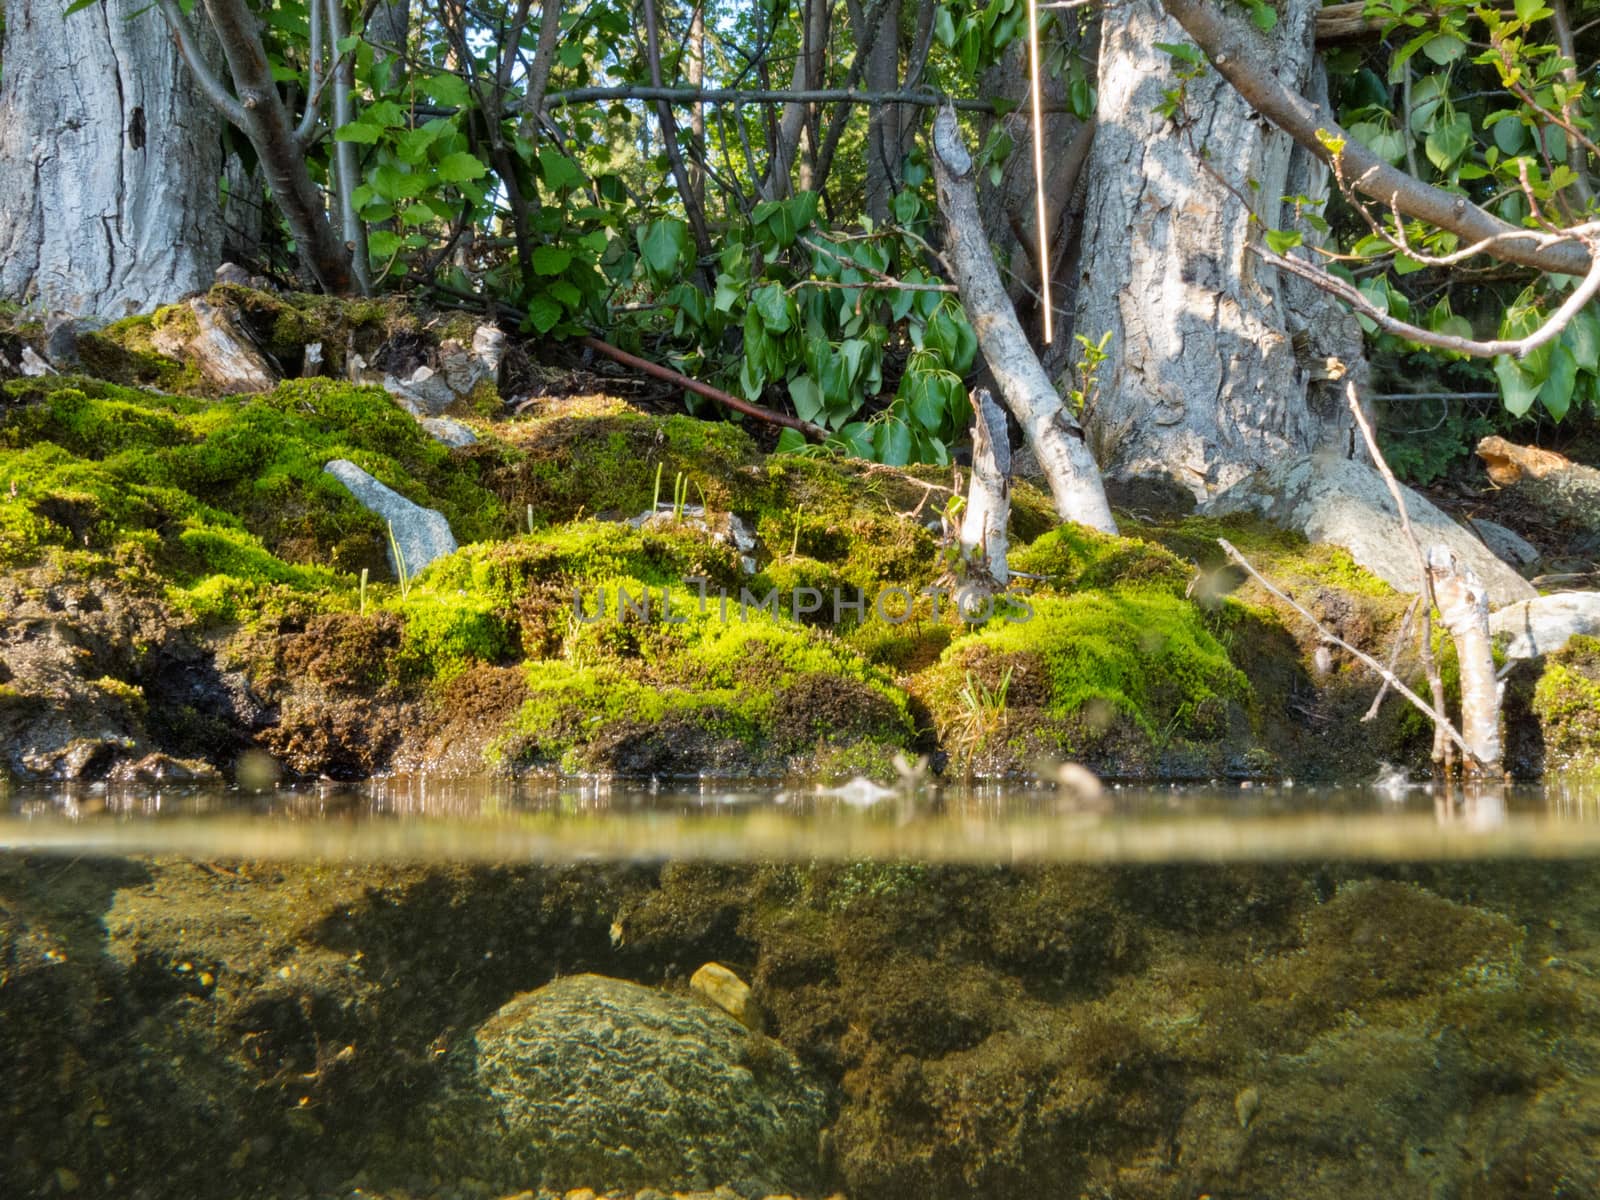 Riparian habitat ecosystem of forest lake shore with tree roots moss and aquatic plants in a over under split underwater view